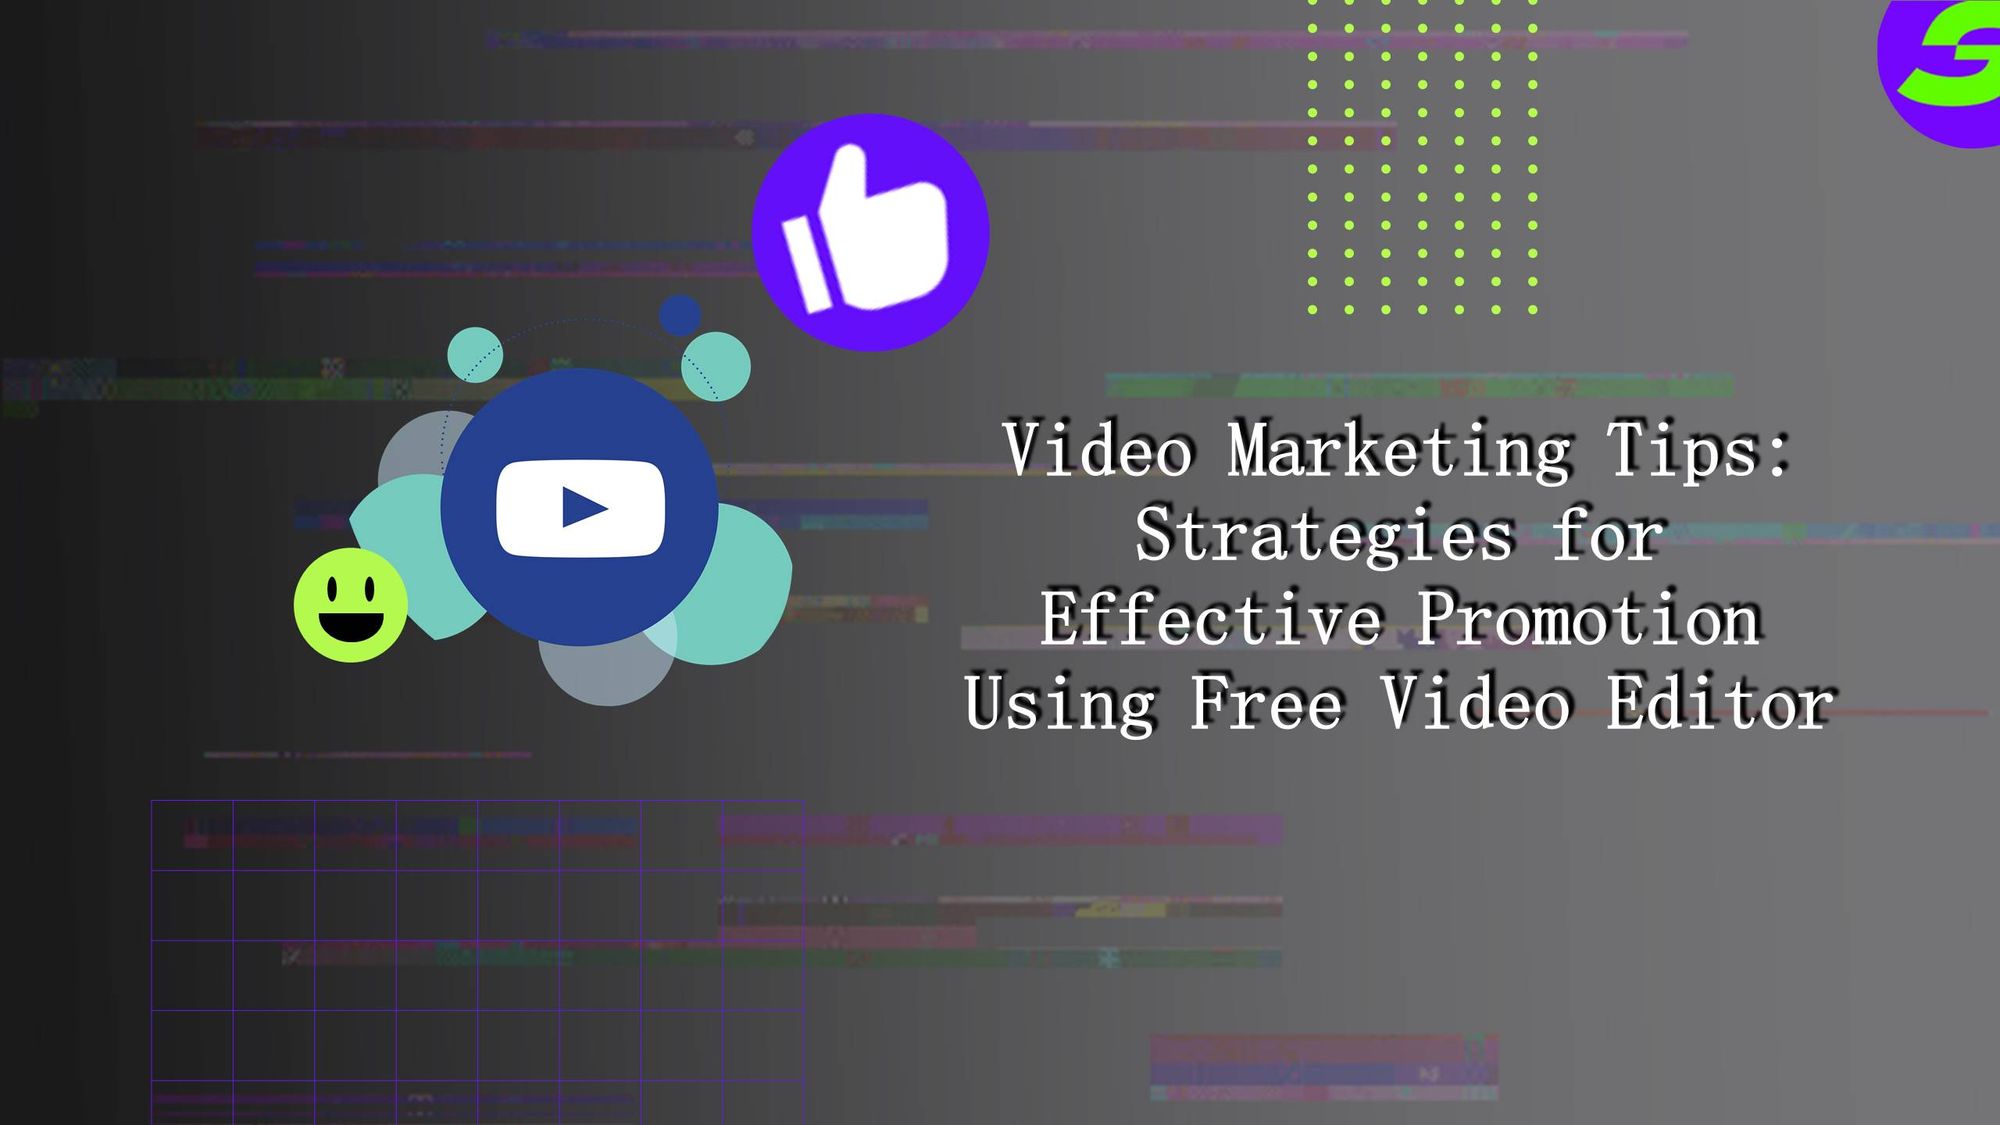 Video Marketing Tips Explore Business Promotion Using Free Video Editing app